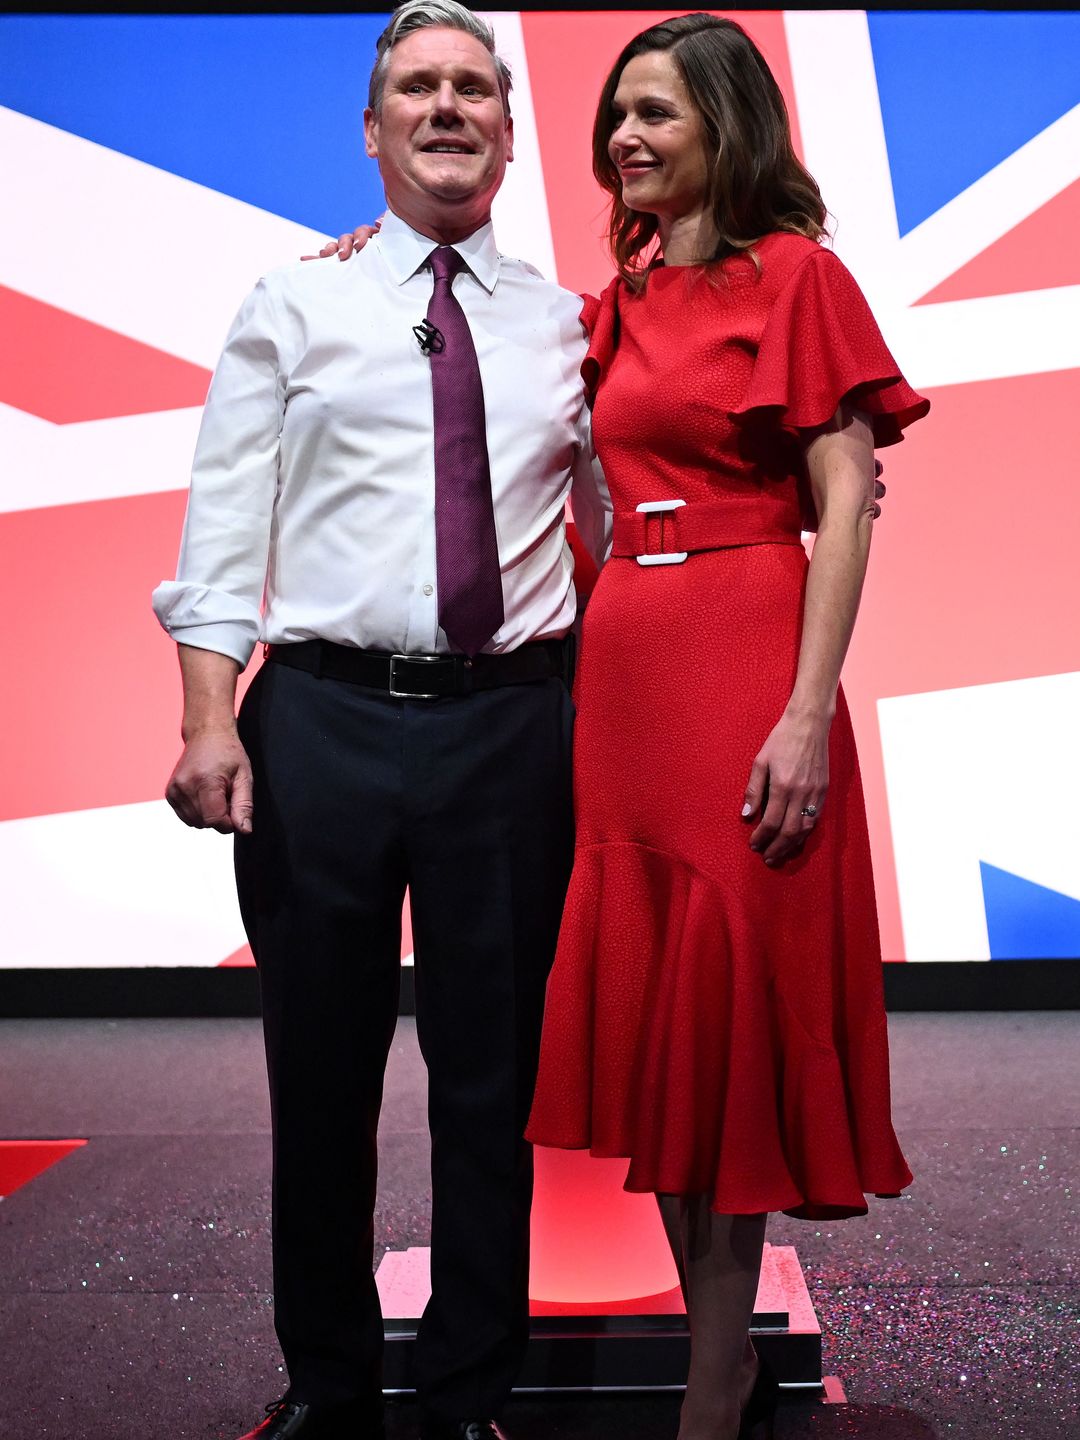 Victoria Starmer wears red alongside new PM Keir